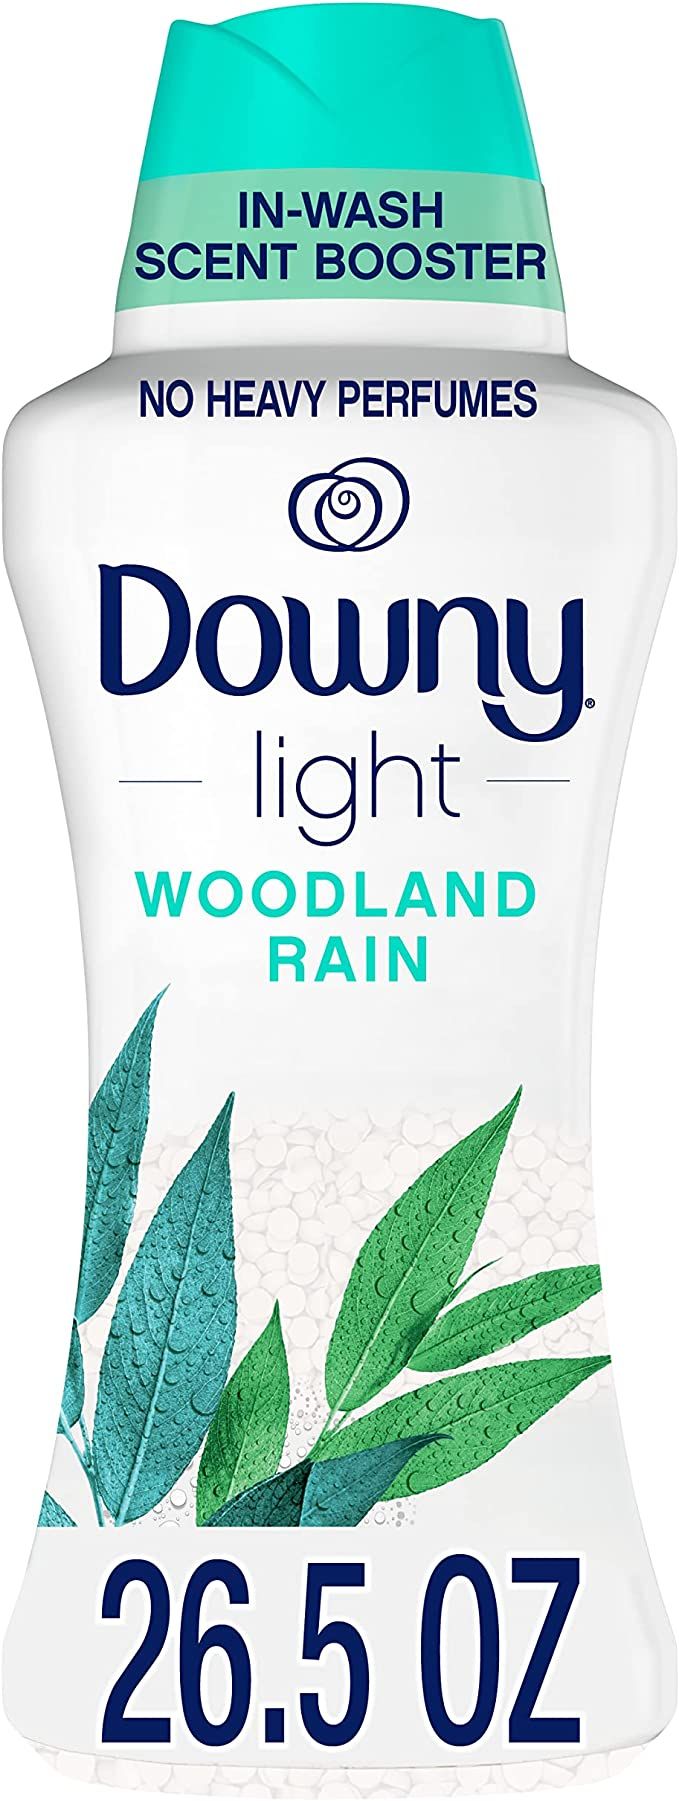 Downy Light Laundry Scent Booster Beads for Washer, Woodland Rain, 26.5 oz, with No Heavy Perfume... | Amazon (US)